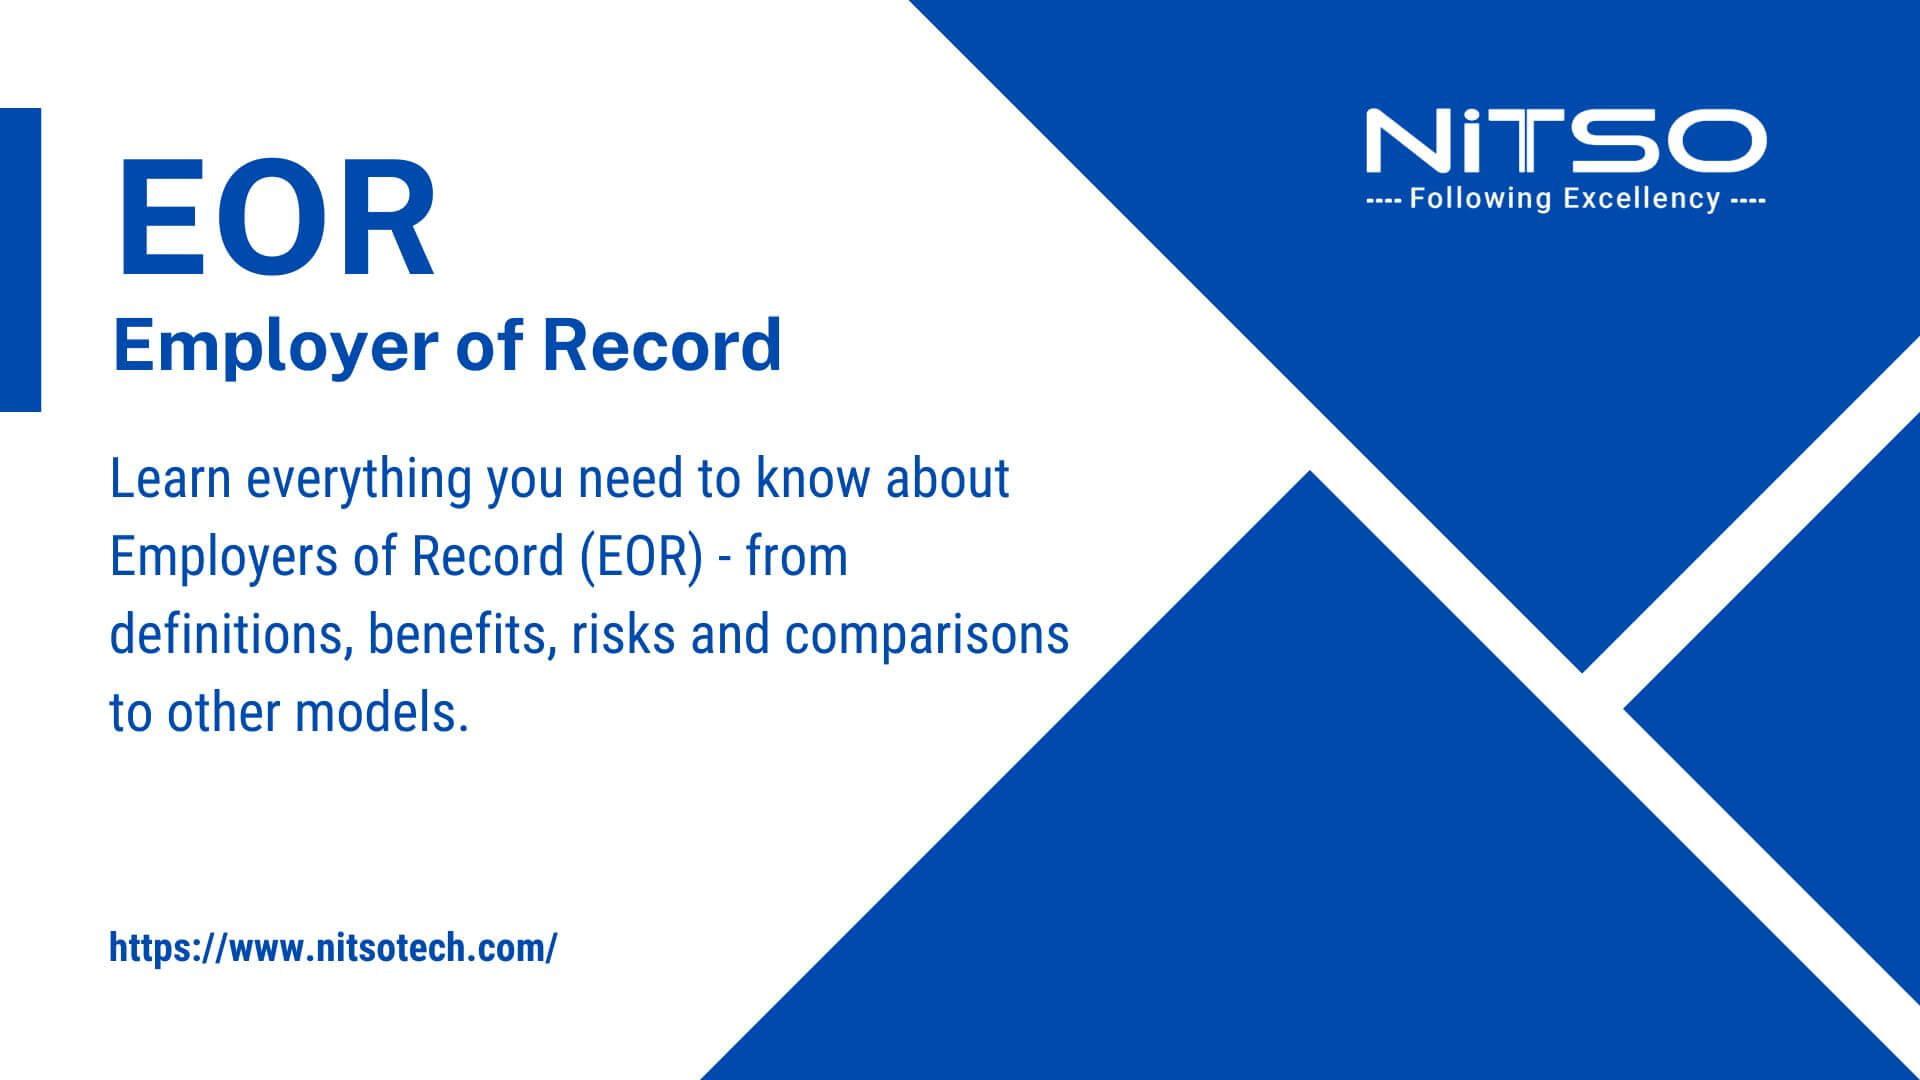 Employer of Record (EOR)